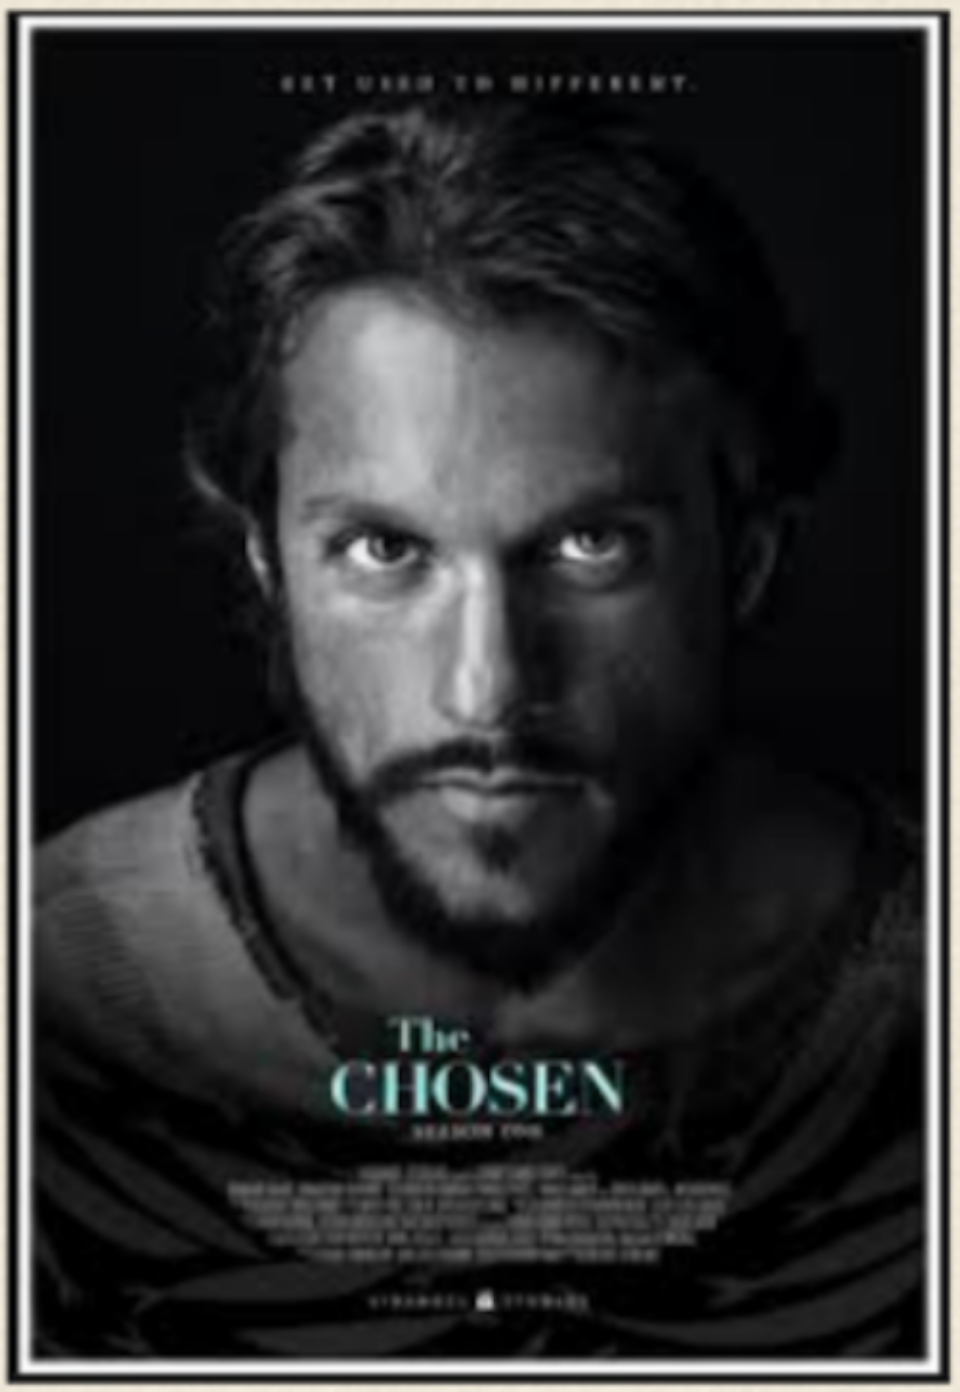 Congrats to Tara Brannon who won the entire 1st Season of THE CHOSEN on DVD! If you haven't seen The Chosen yet, please please check it out today. Don't wait! Start watching The Chosen now by clicking the image above.